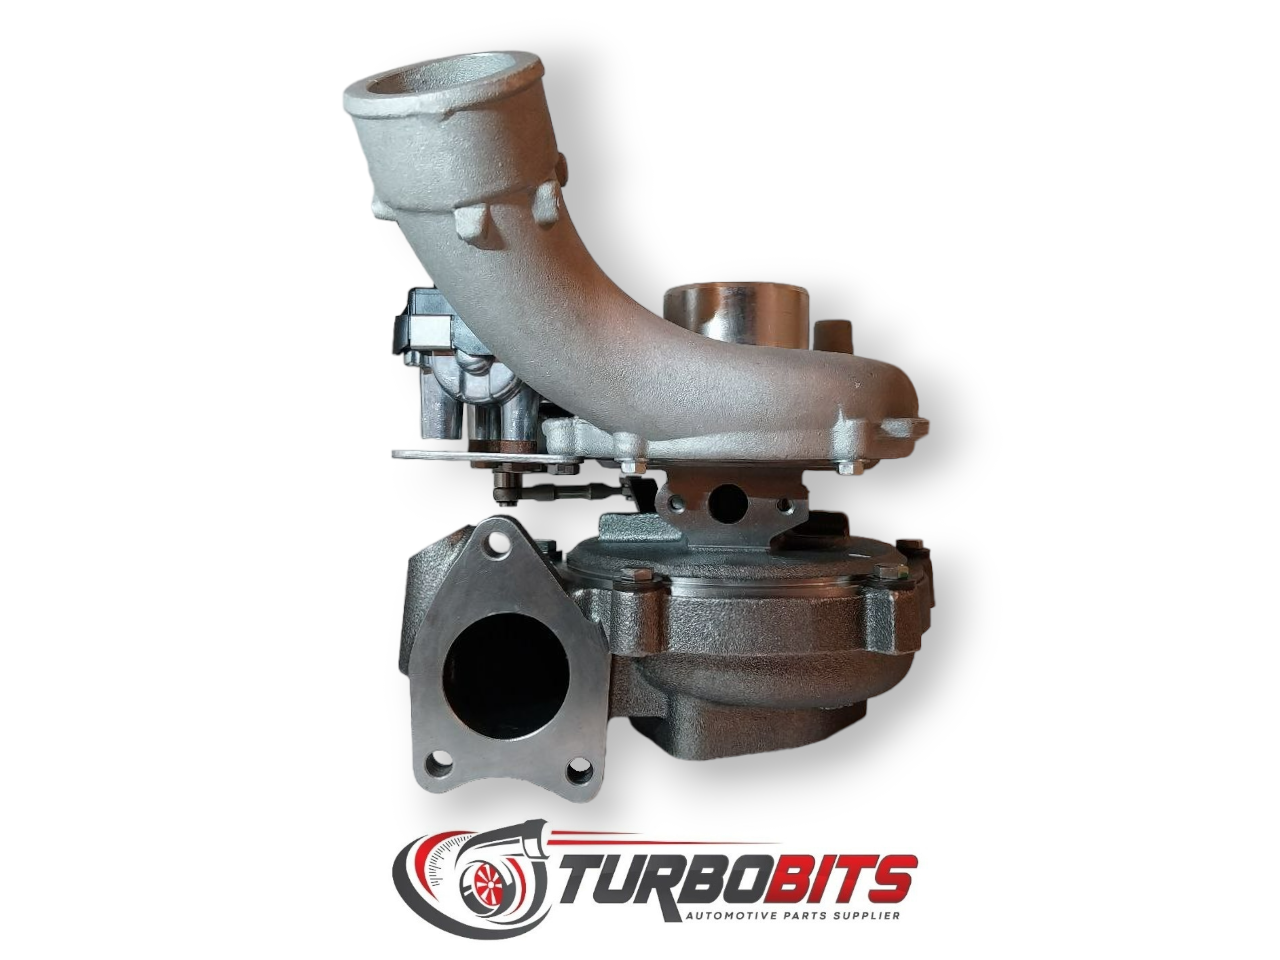 Replacement turbo for 3.0tdi